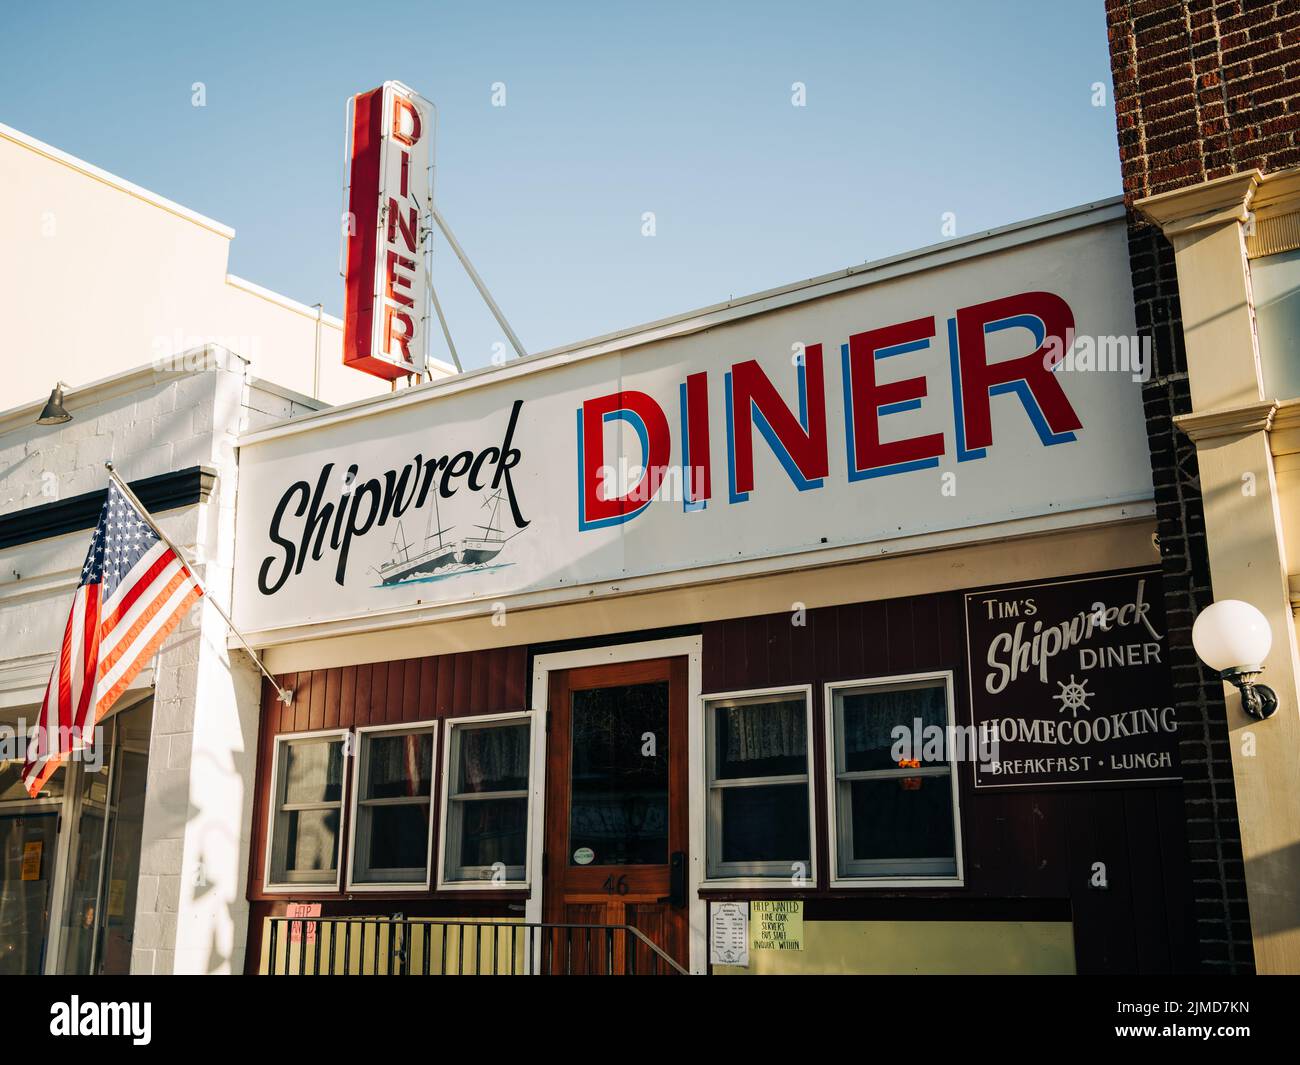 Retro signs at Tims Shipwreck Diner, Northport, New York Stock Photo